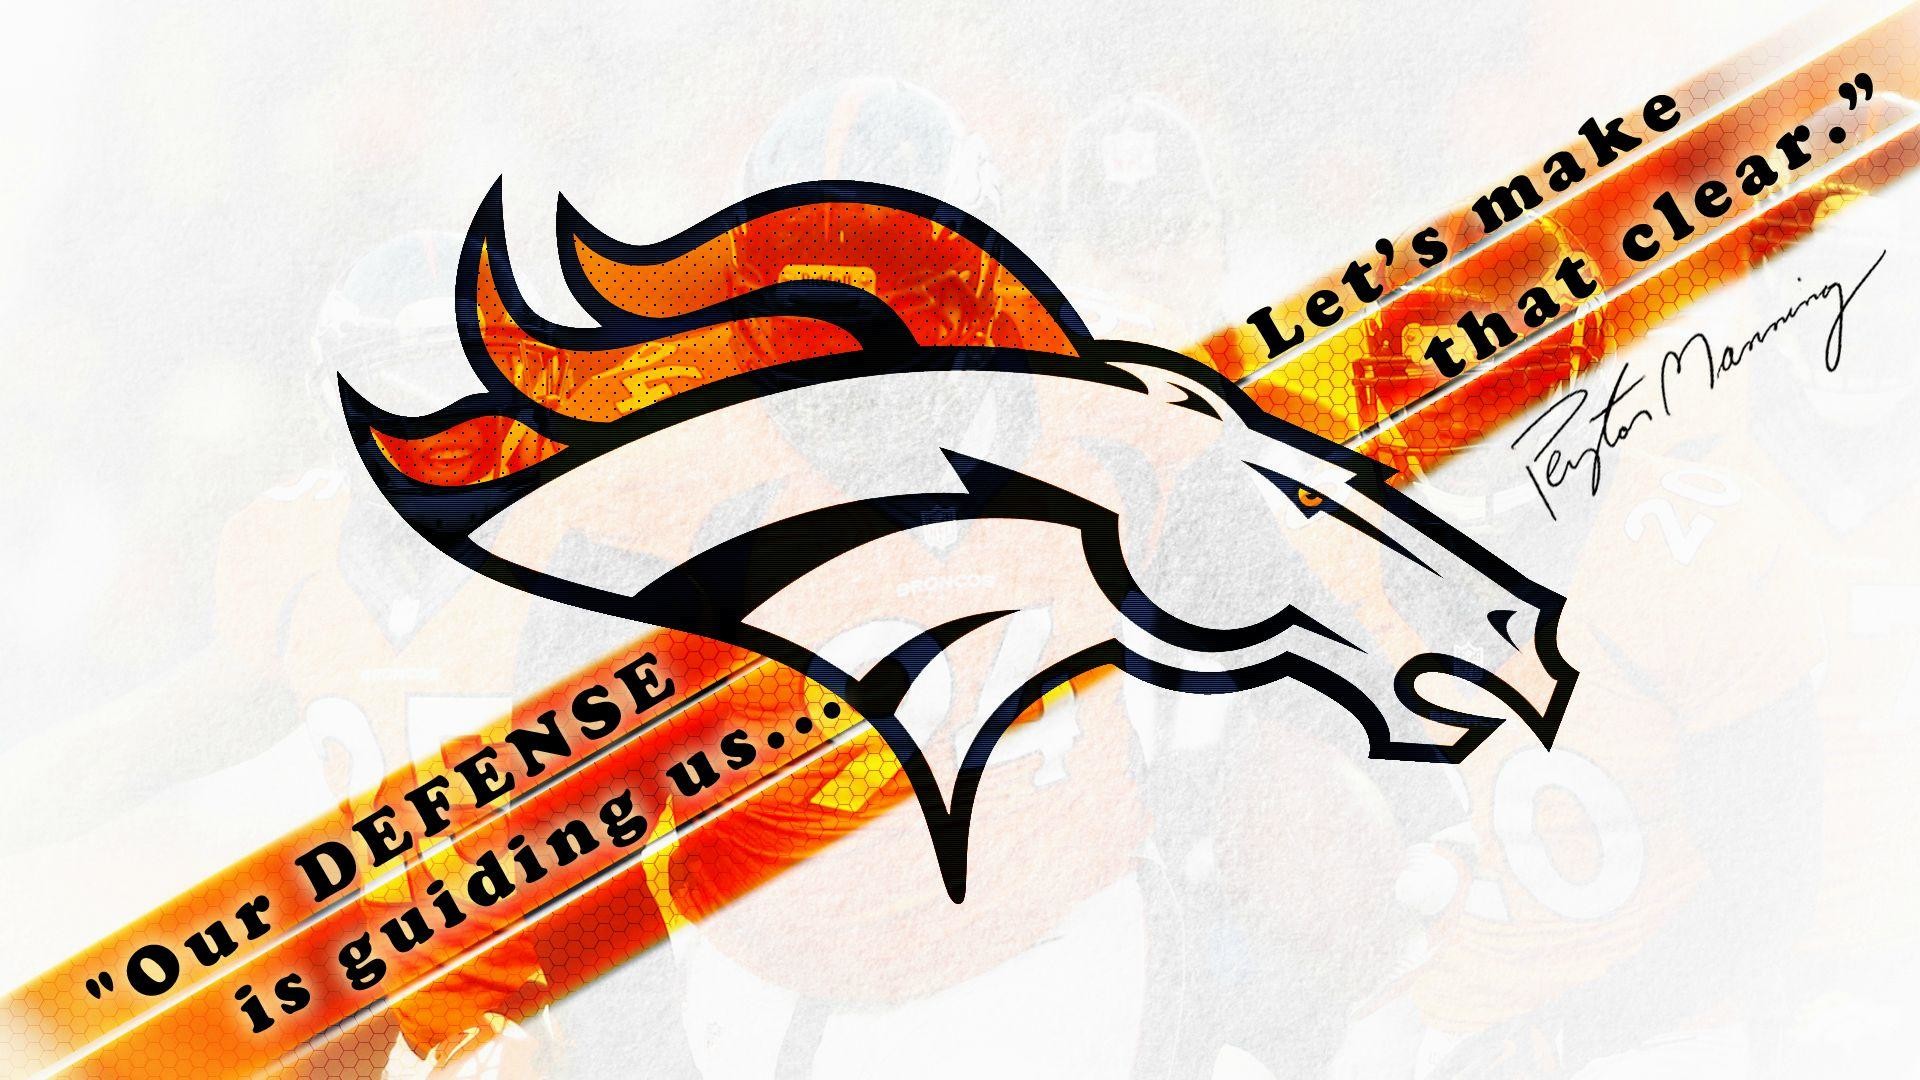 1920x1080 Peyton-s-quote-on-Defense-after-Divisional-win-